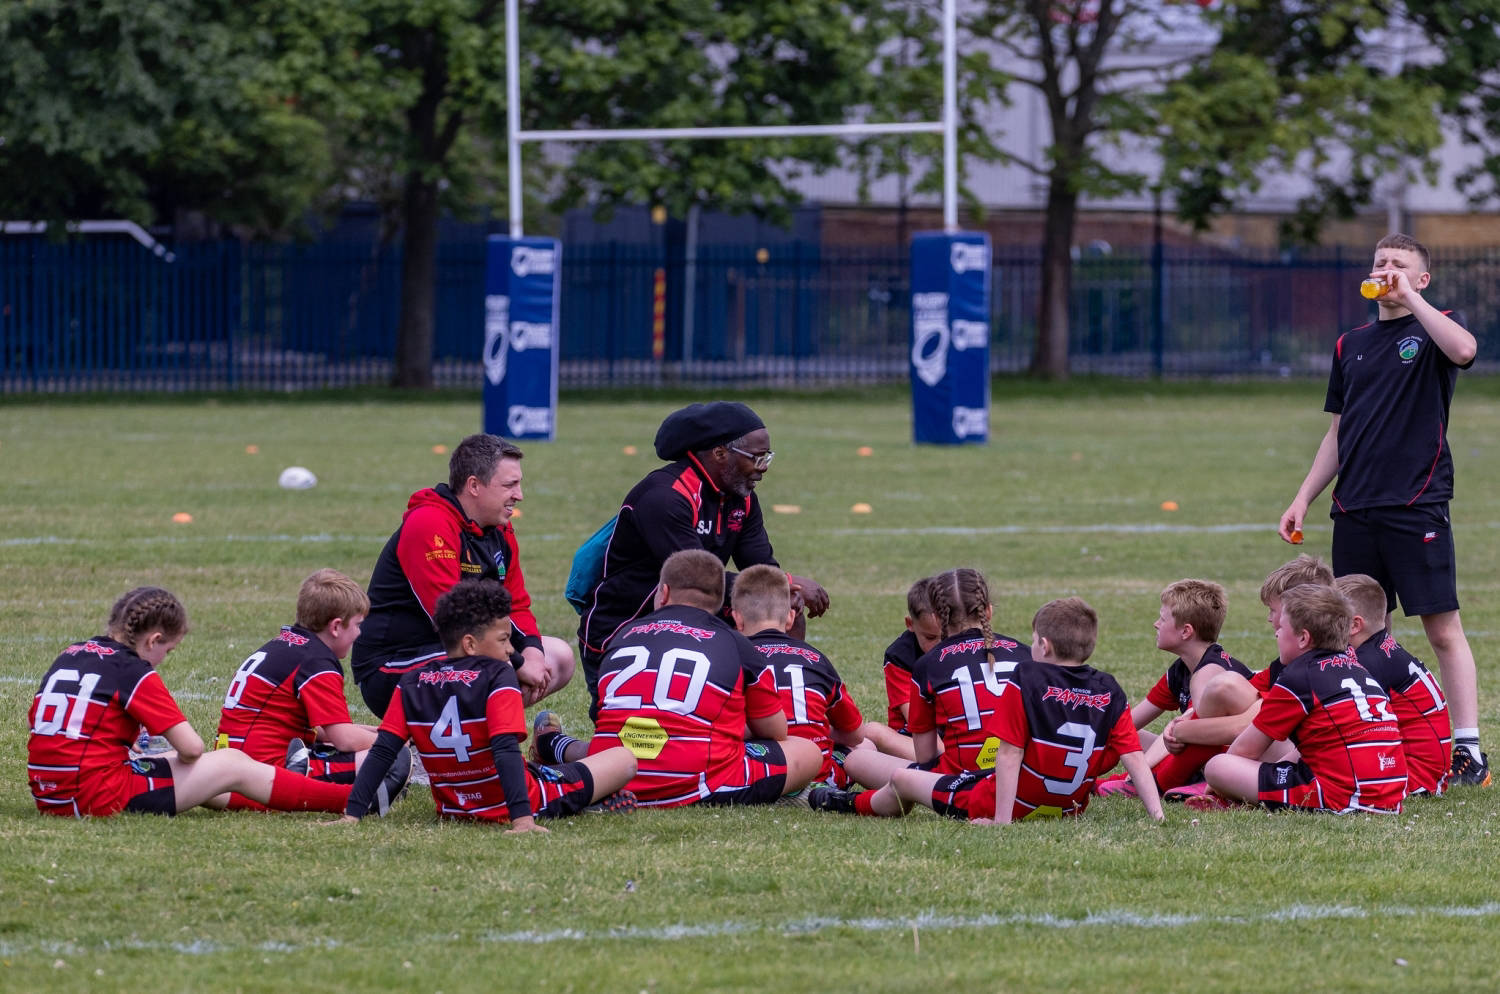 RFL makes Challenge Cup Final a day to remember for hundreds of schoolchildren  